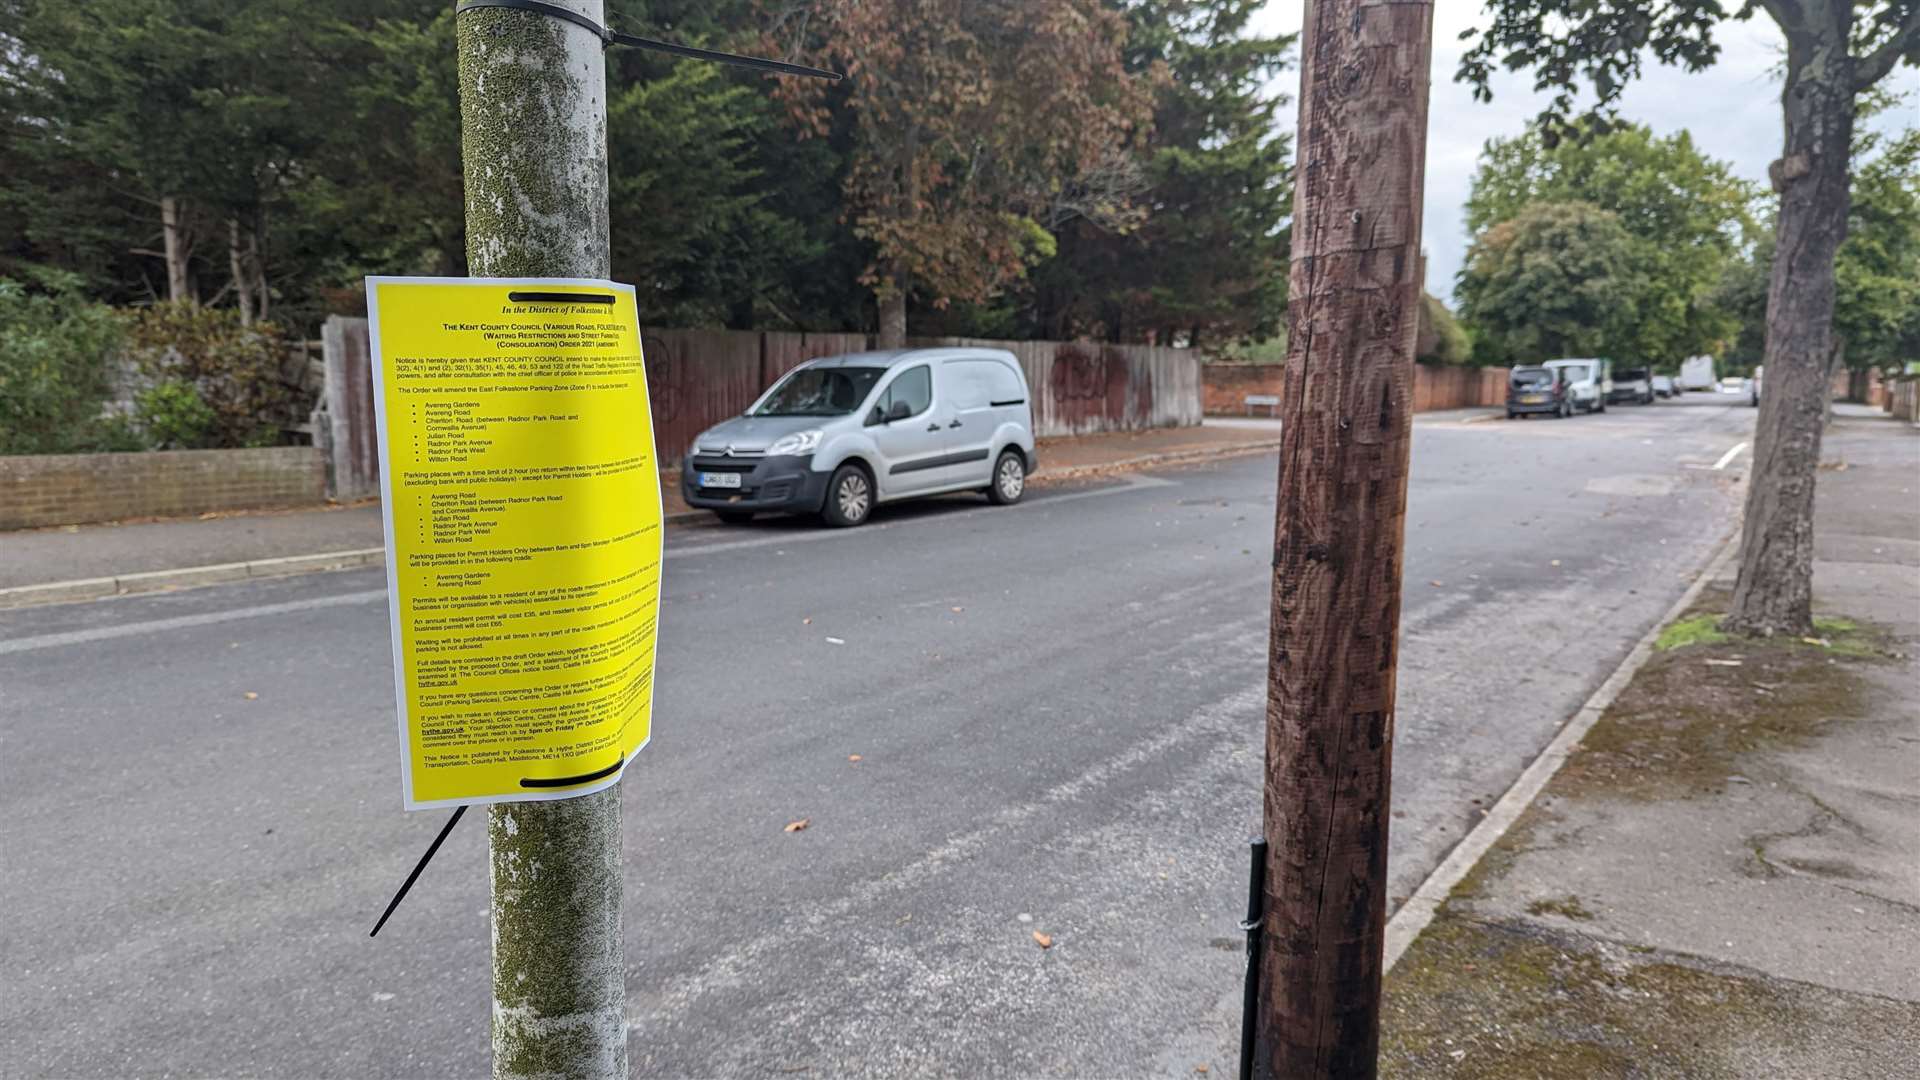 A notice alerting residents to the proposed parking restrictions